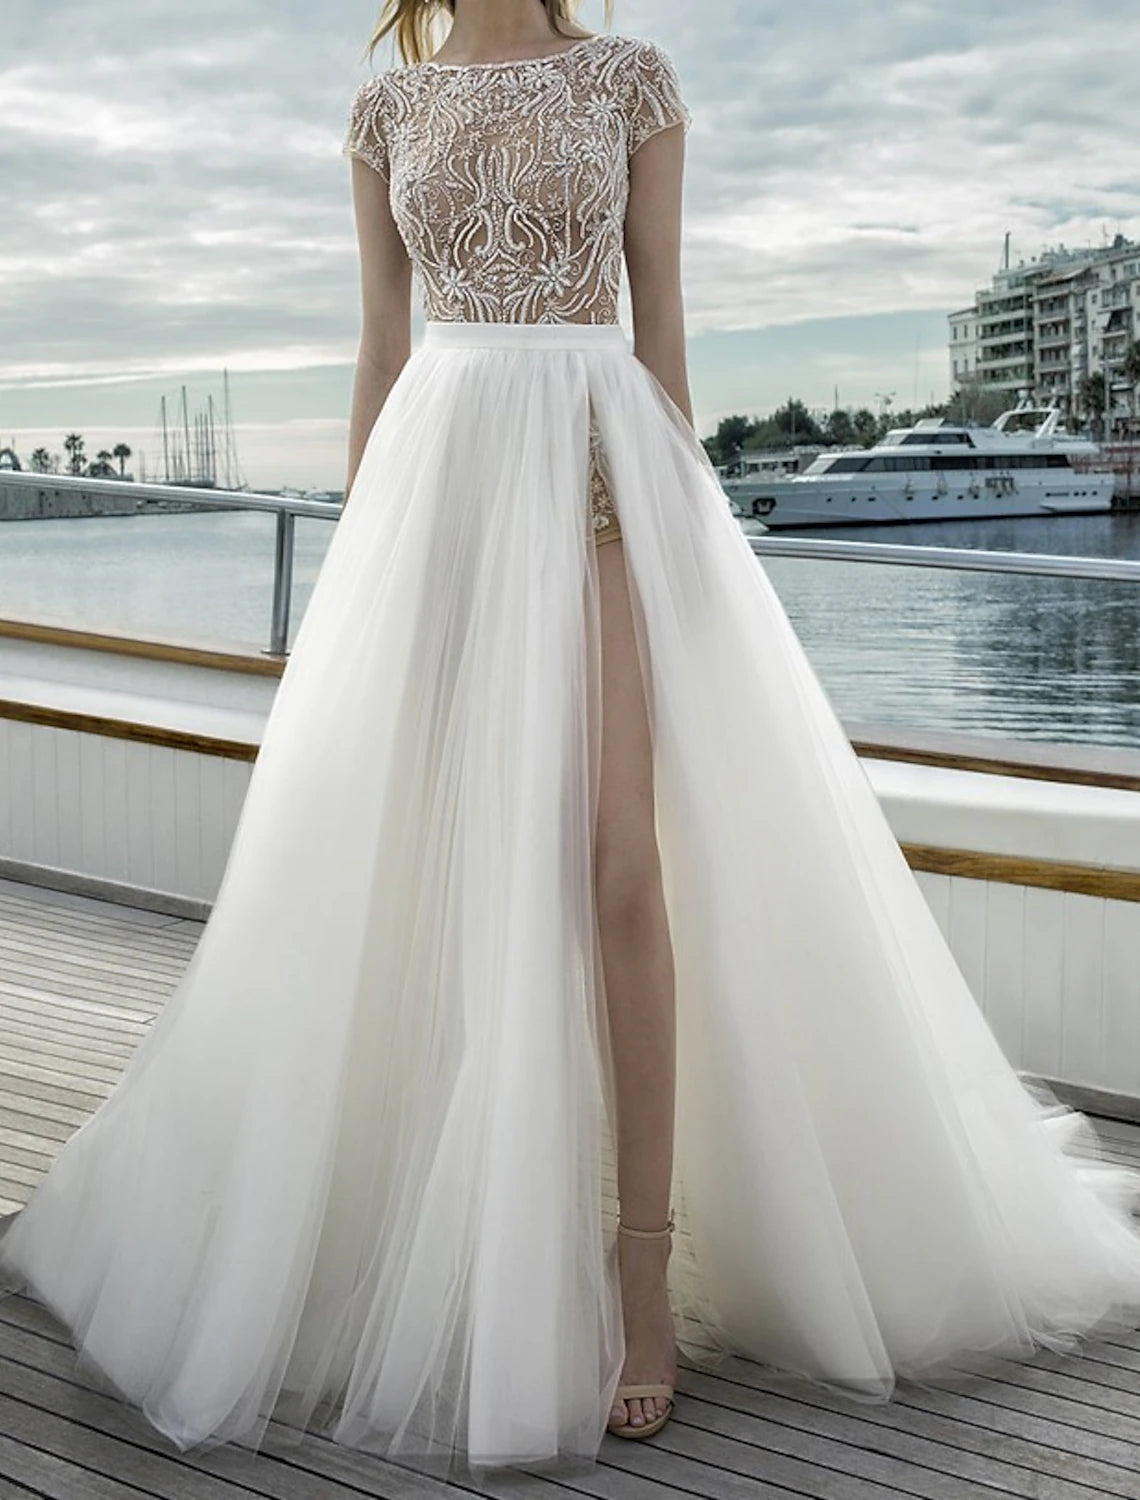 Beach Casual Wedding Dresses A-Line Separates Separates Court Train Tulle Bridal Skirts Bridal Gowns With Split Front Solid Color